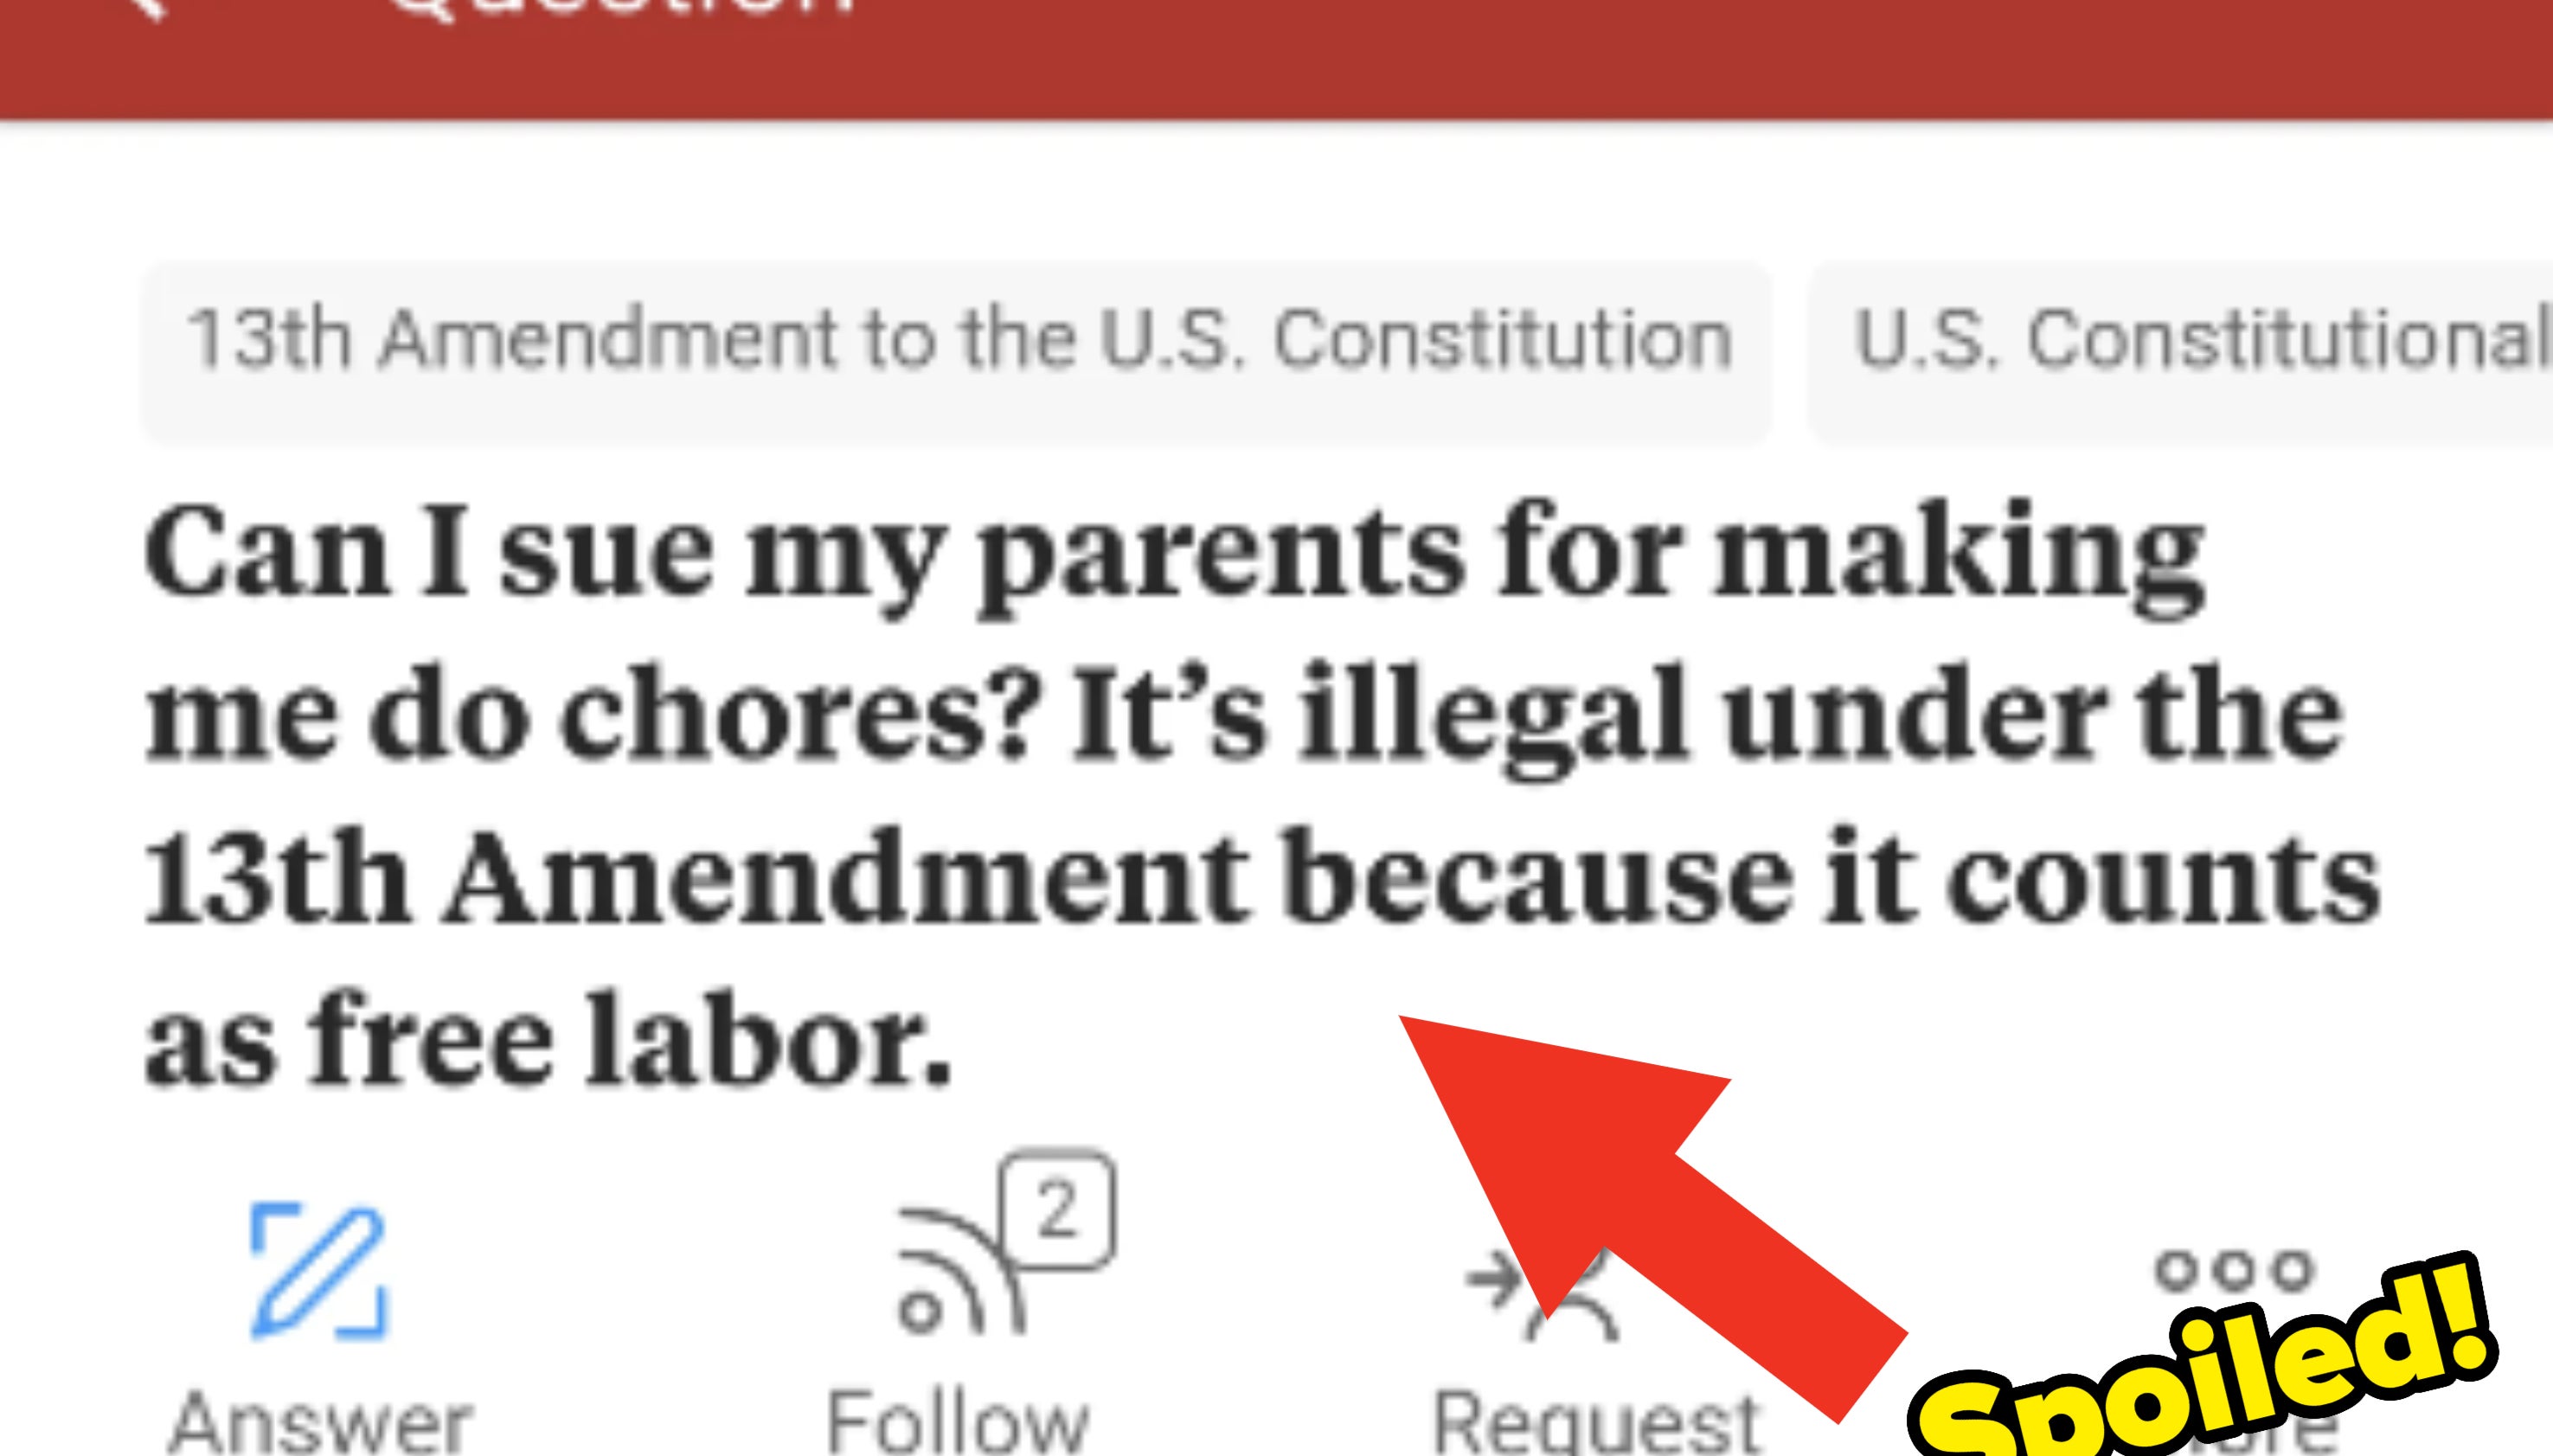 Question about legality of chores under the 13th Amendment